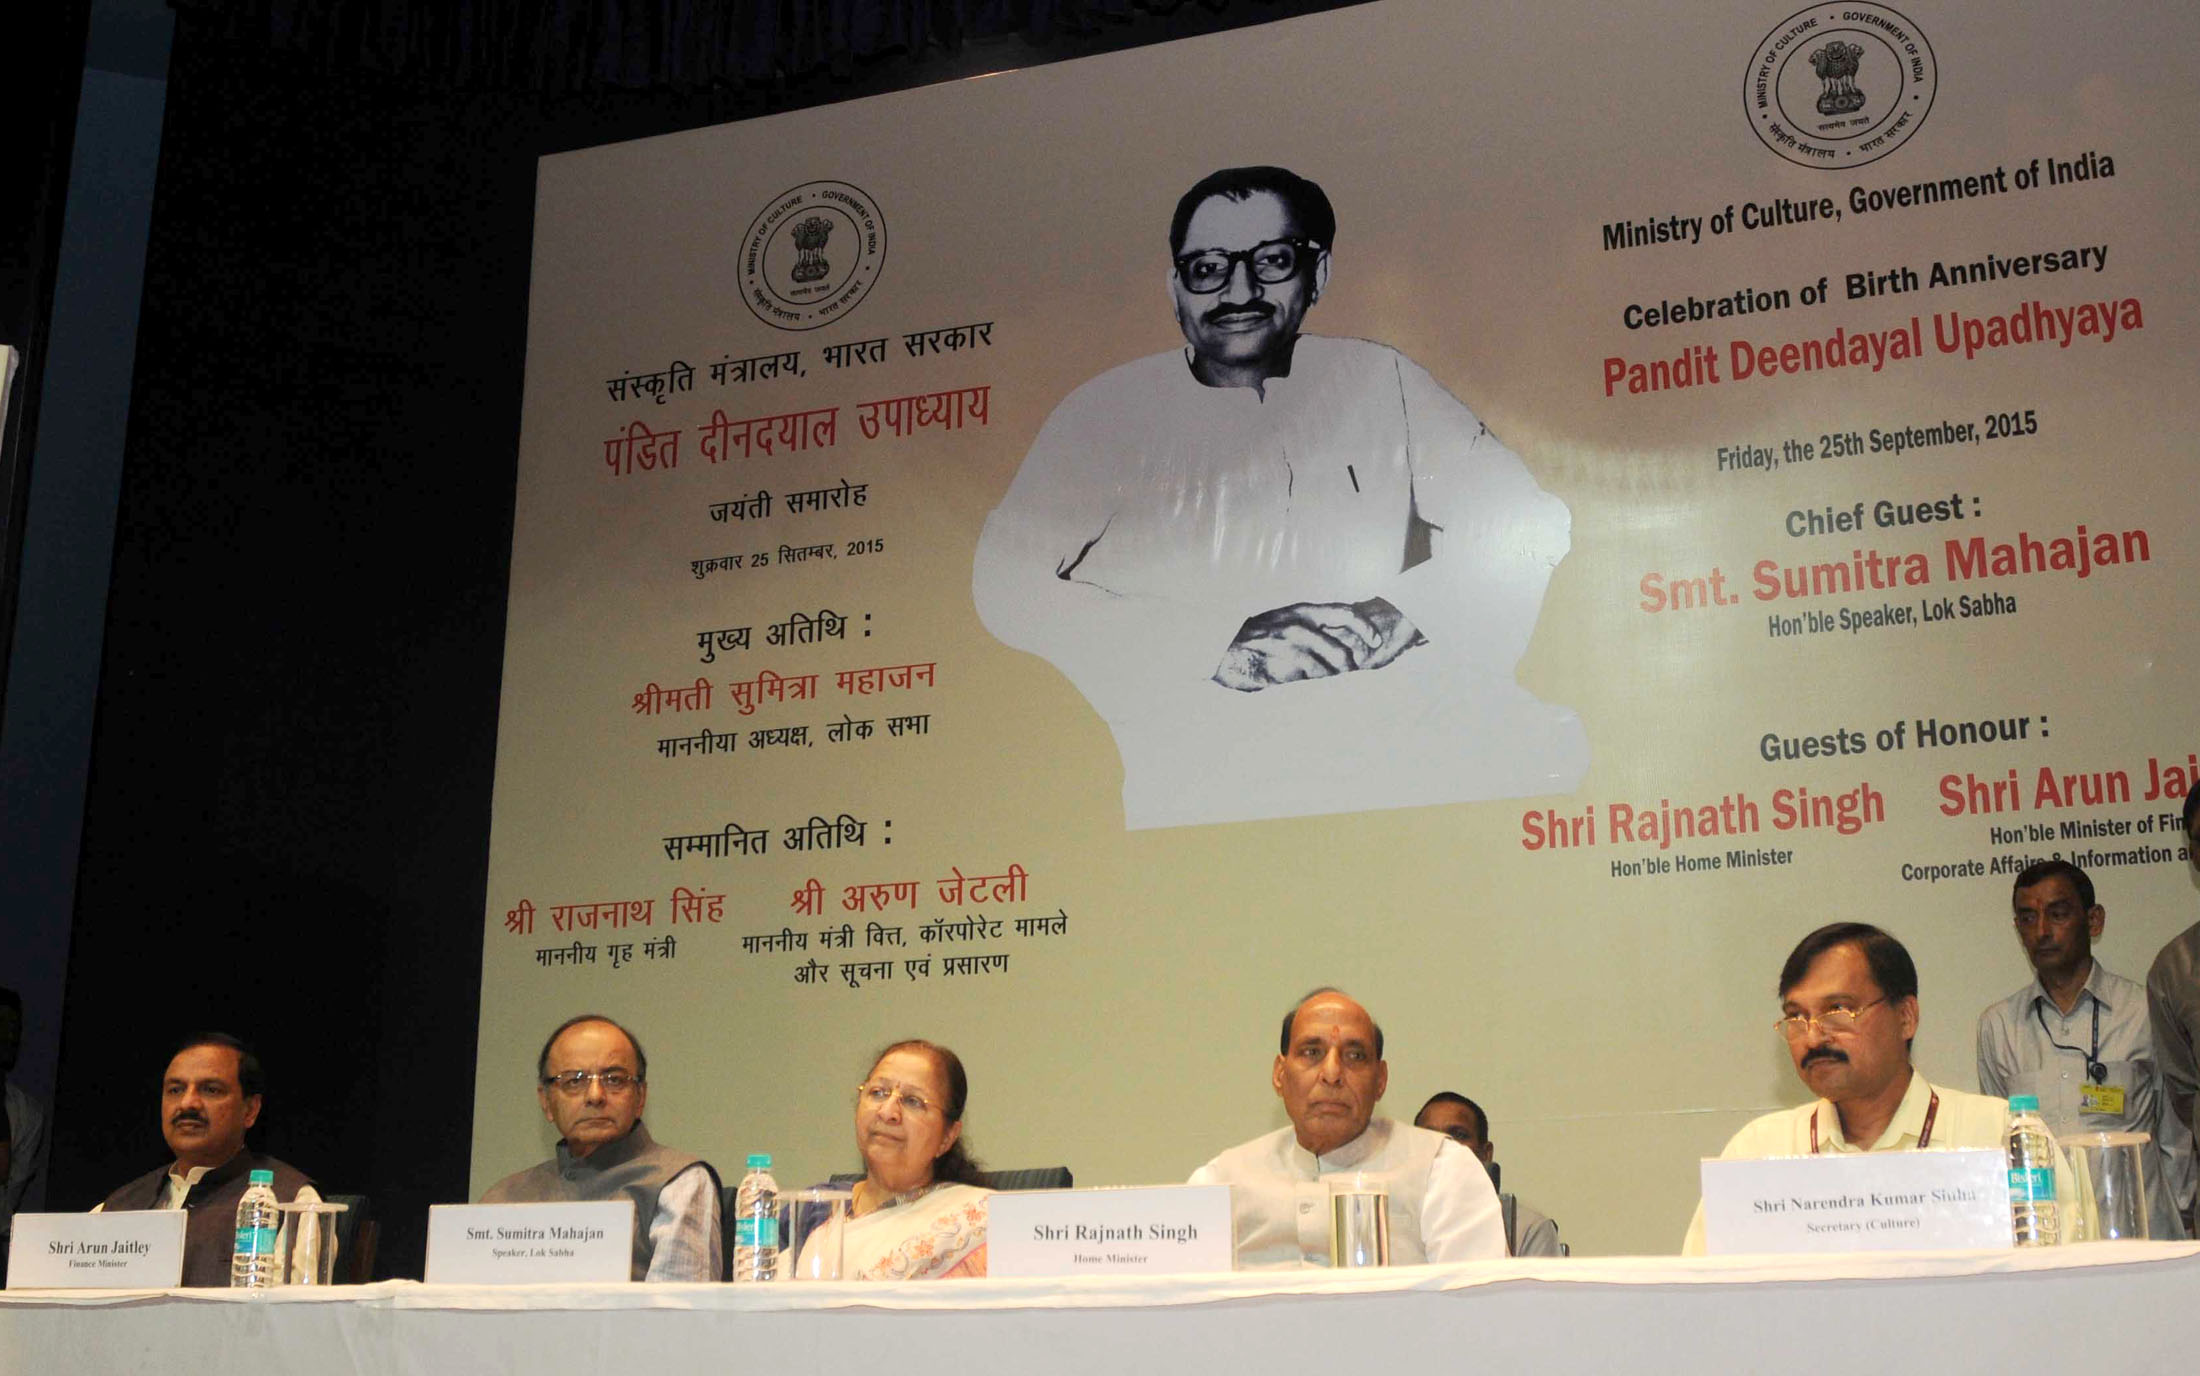 The Speaker, Lok Sabha, Smt. Sumitra Mahajan, the Union Home Minister, Shri Rajnath Singh, the Union Minister for Finance, Corporate Affairs and Information & Broadcasting, Shri Arun Jaitley, the Minister of State for Culture (Independent Charge), Tourism (Independent Charge) and Civil Aviation, Dr. Mahesh Sharma and the Secretary, Ministry of Culture, Shri Narendra Kumar Sinha at the Birth Anniversary Celebrations of Pandit Deendayal Upadhyaya, in New Delhi on September 25, 2015.